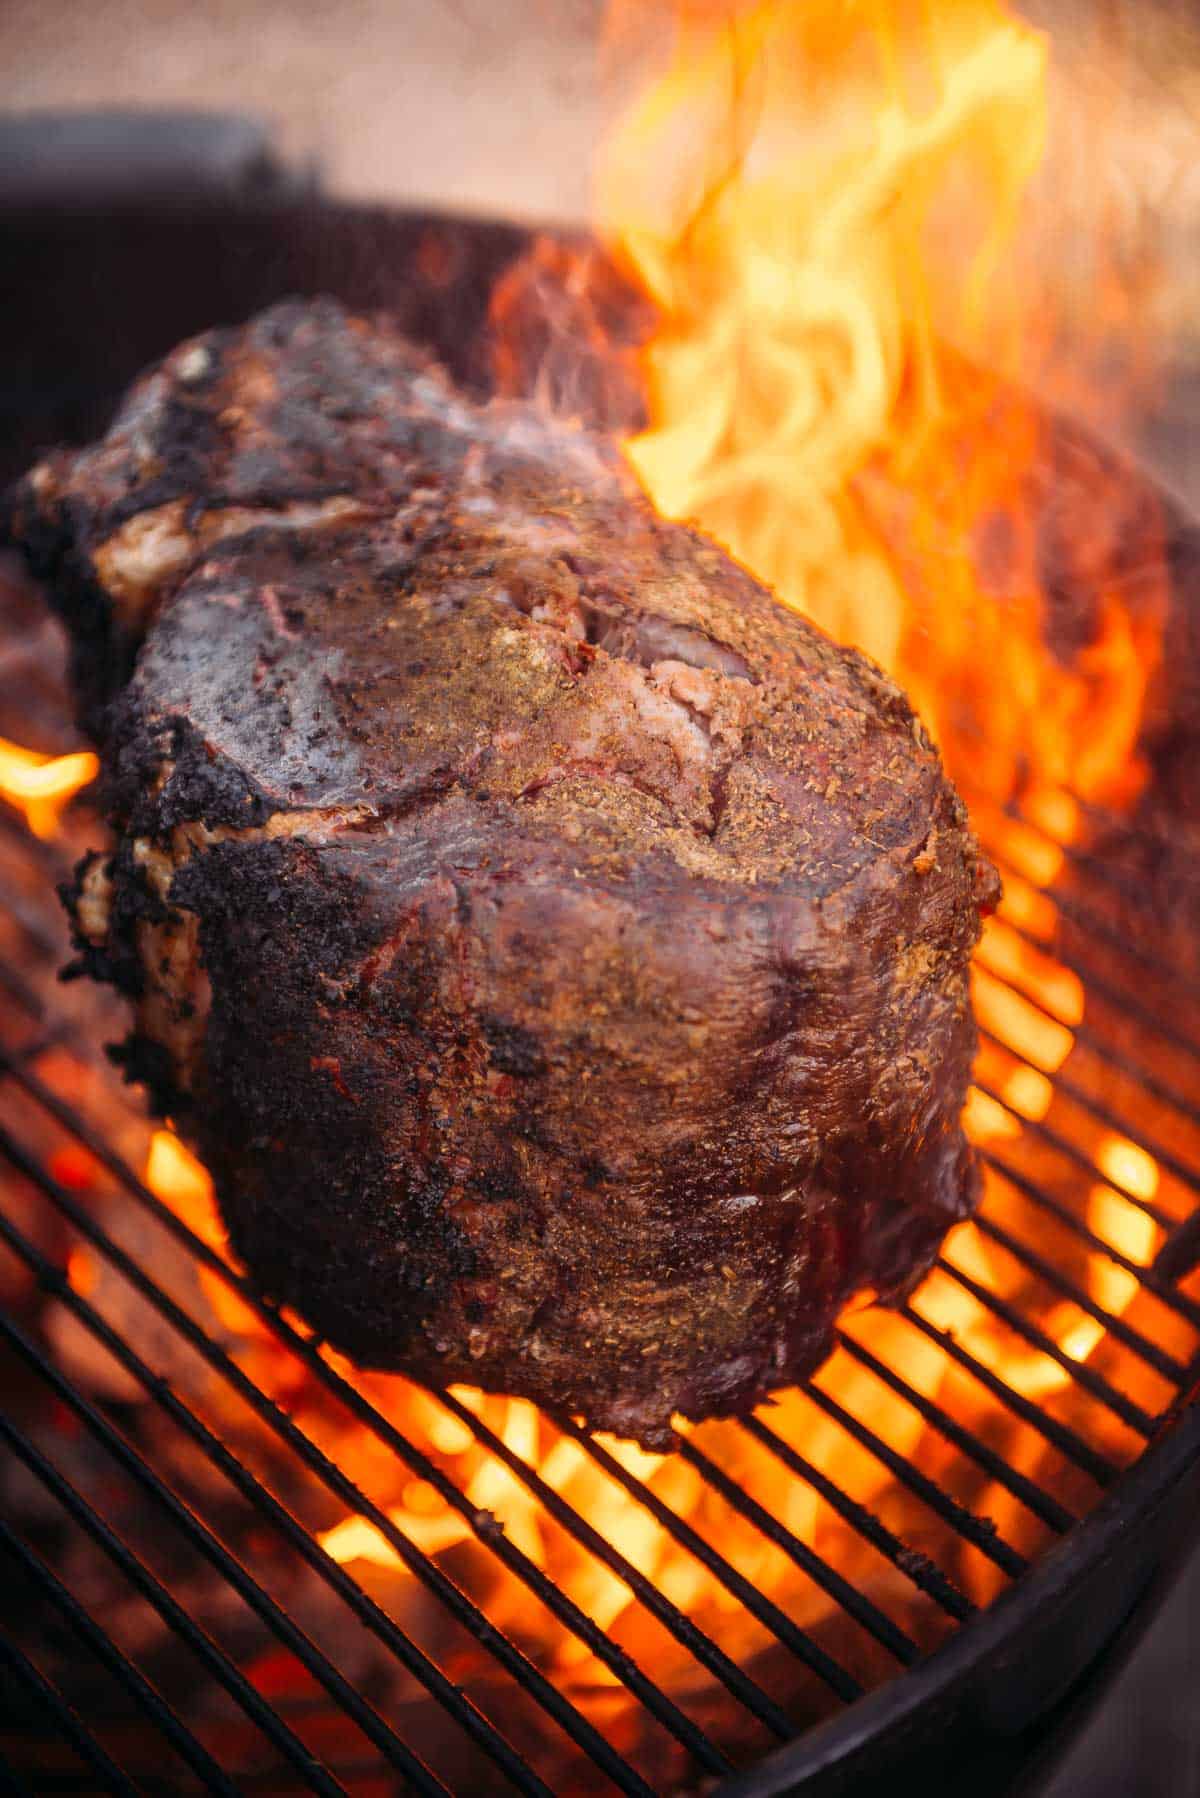 An example of a flare up; a prime rib on a grill with lots flames on it. 